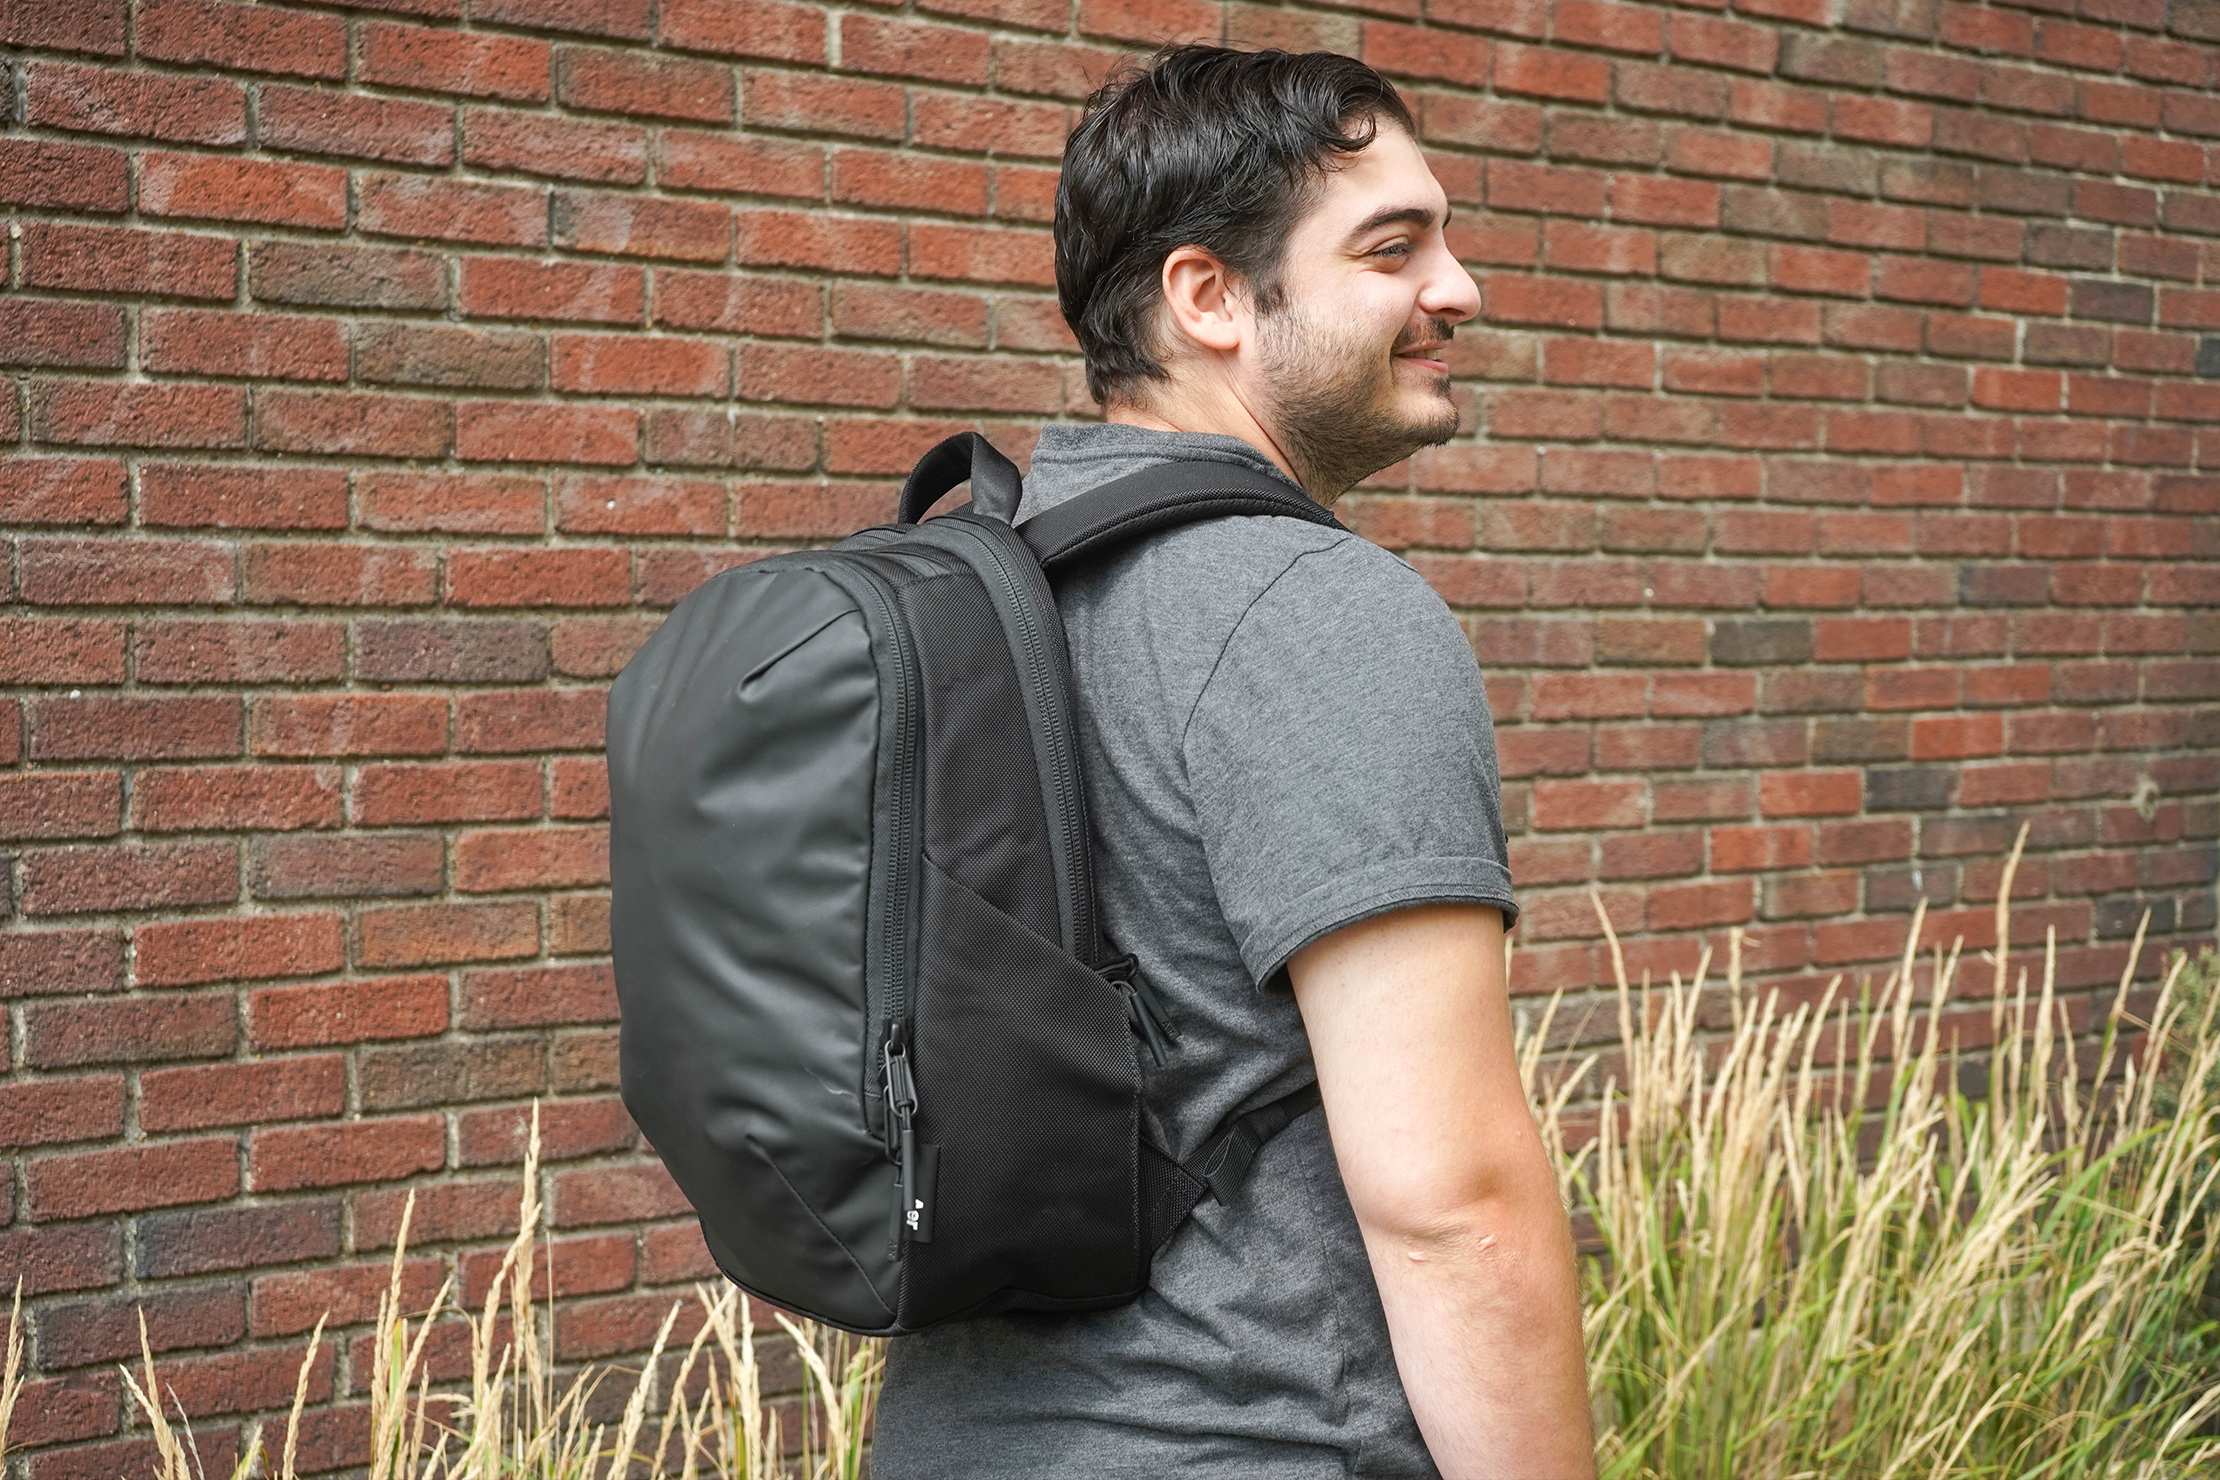 Aer Day Pack 2 Review | Pack Hacker